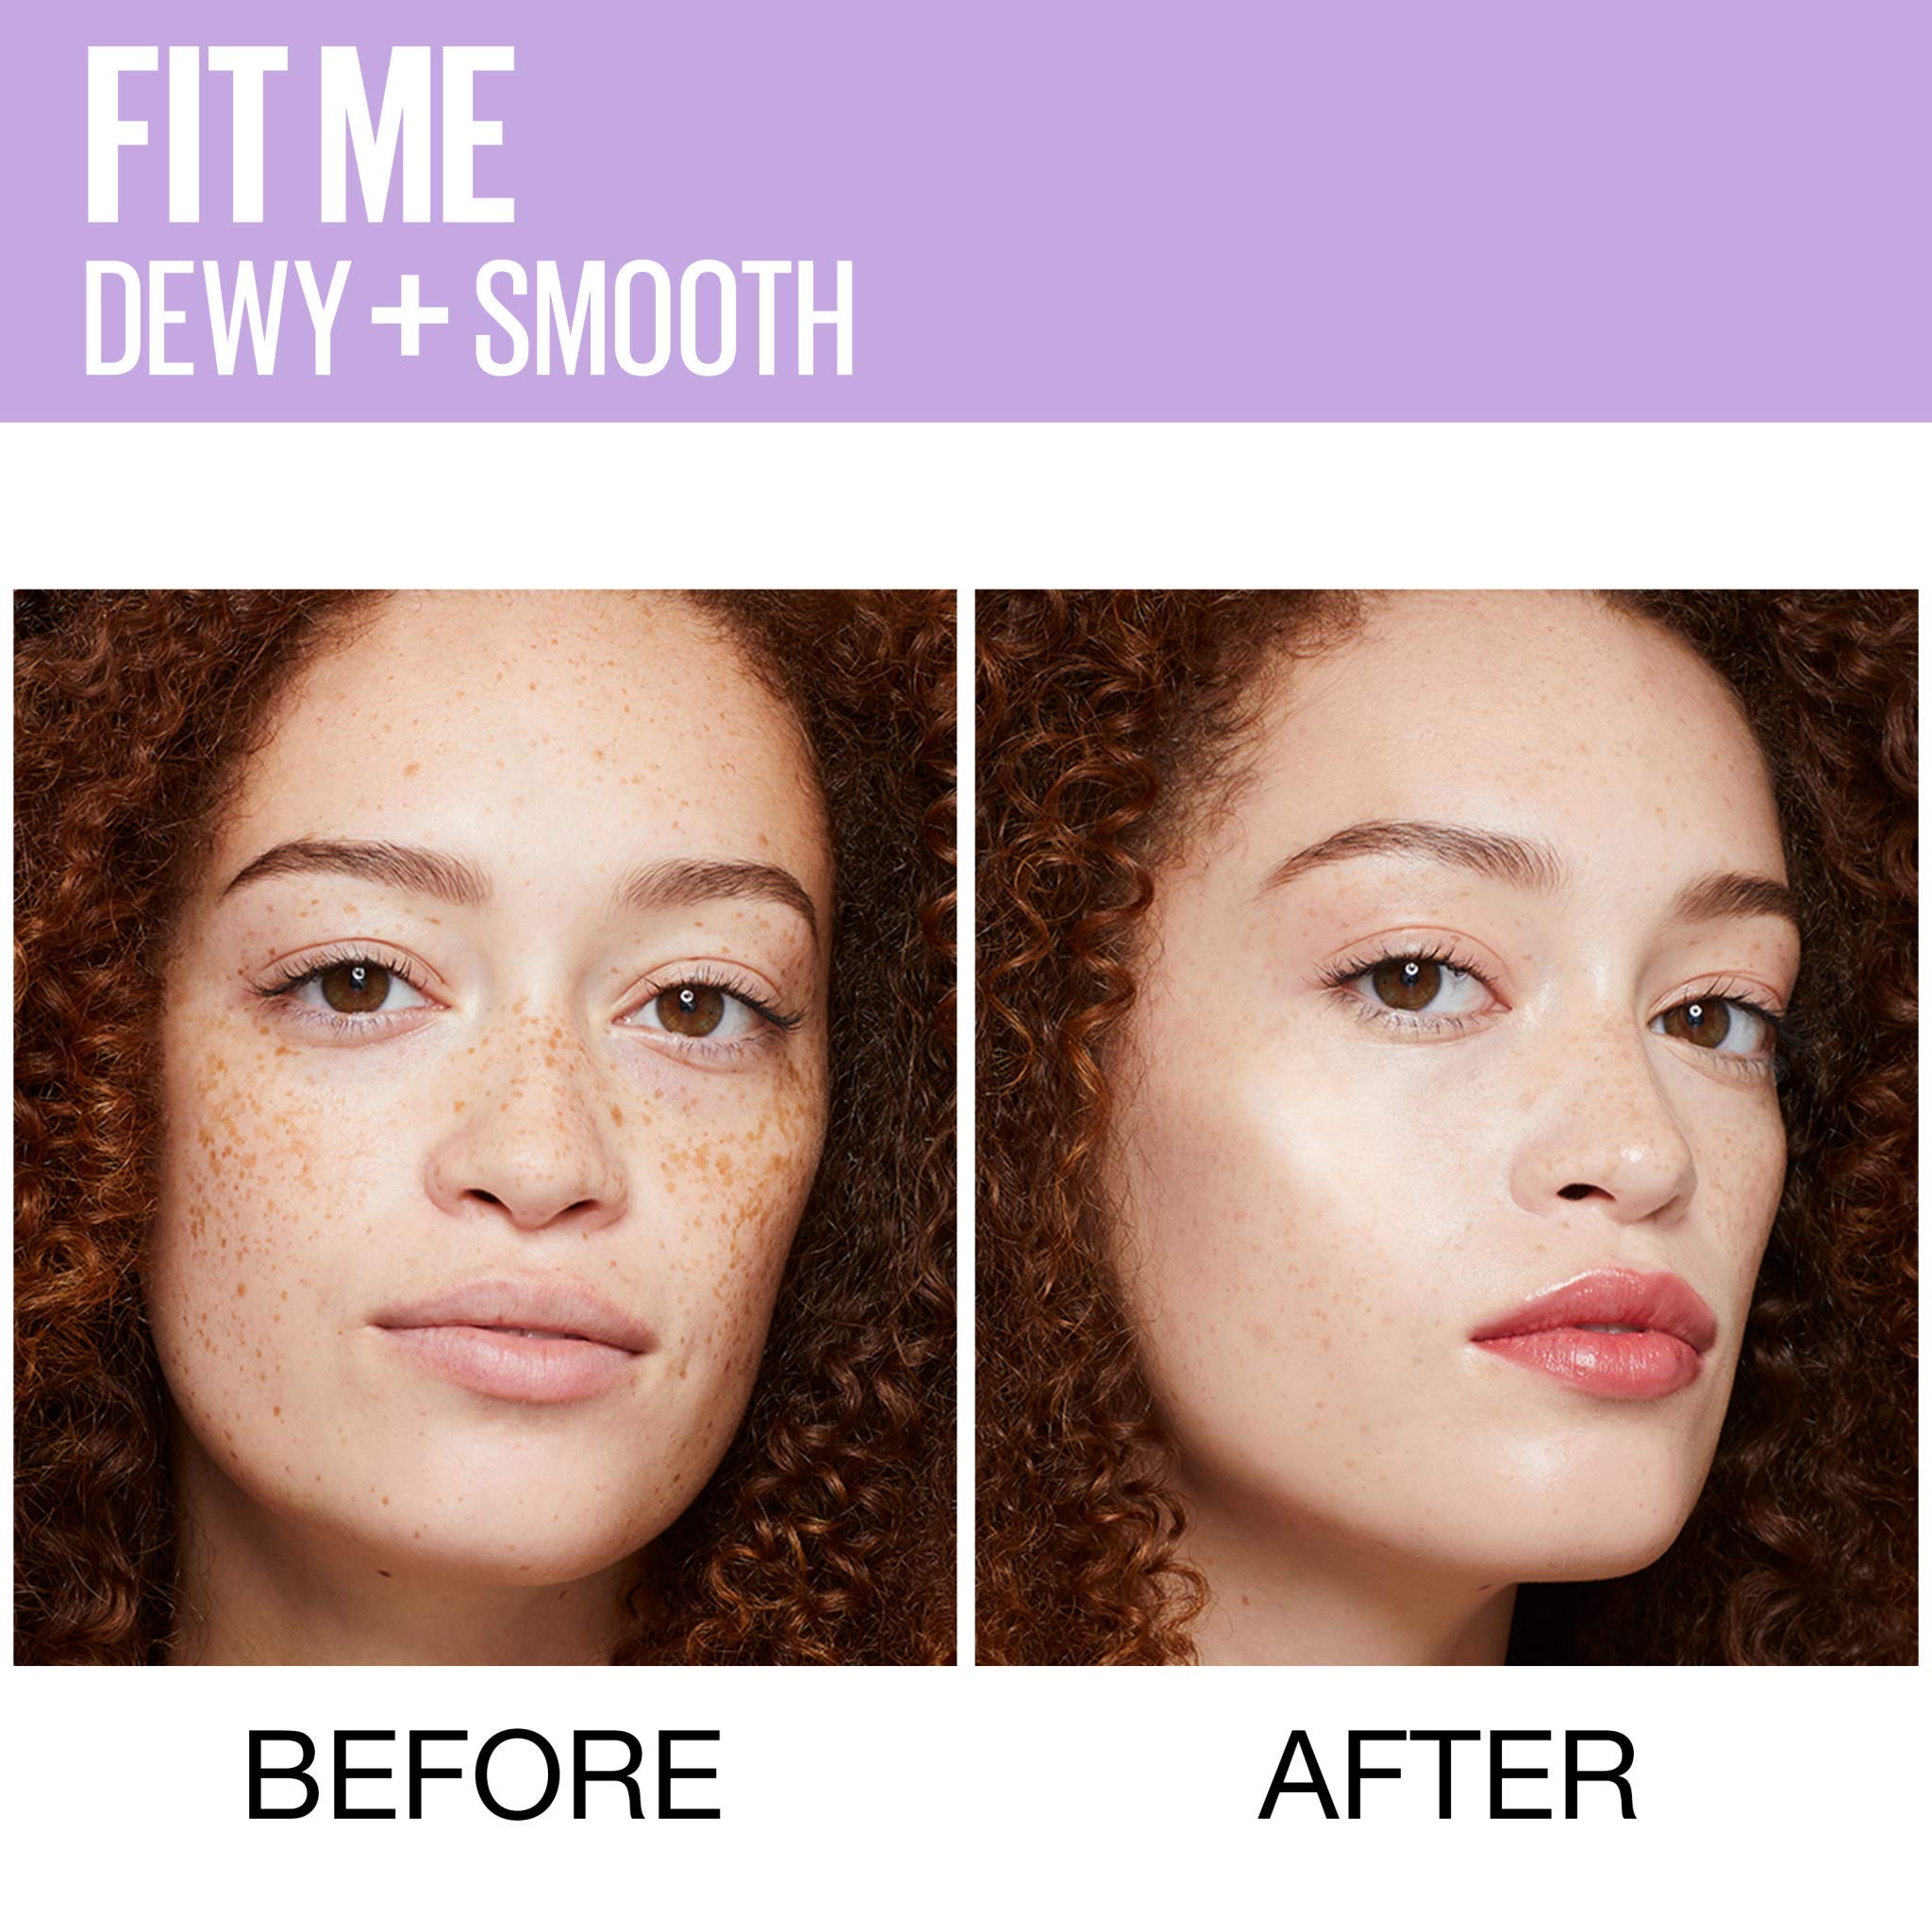 Maybelline Fit Me Dewy + Smooth SPF 18 Liquid Foundation Makeup, Classic Beige, 1 Count